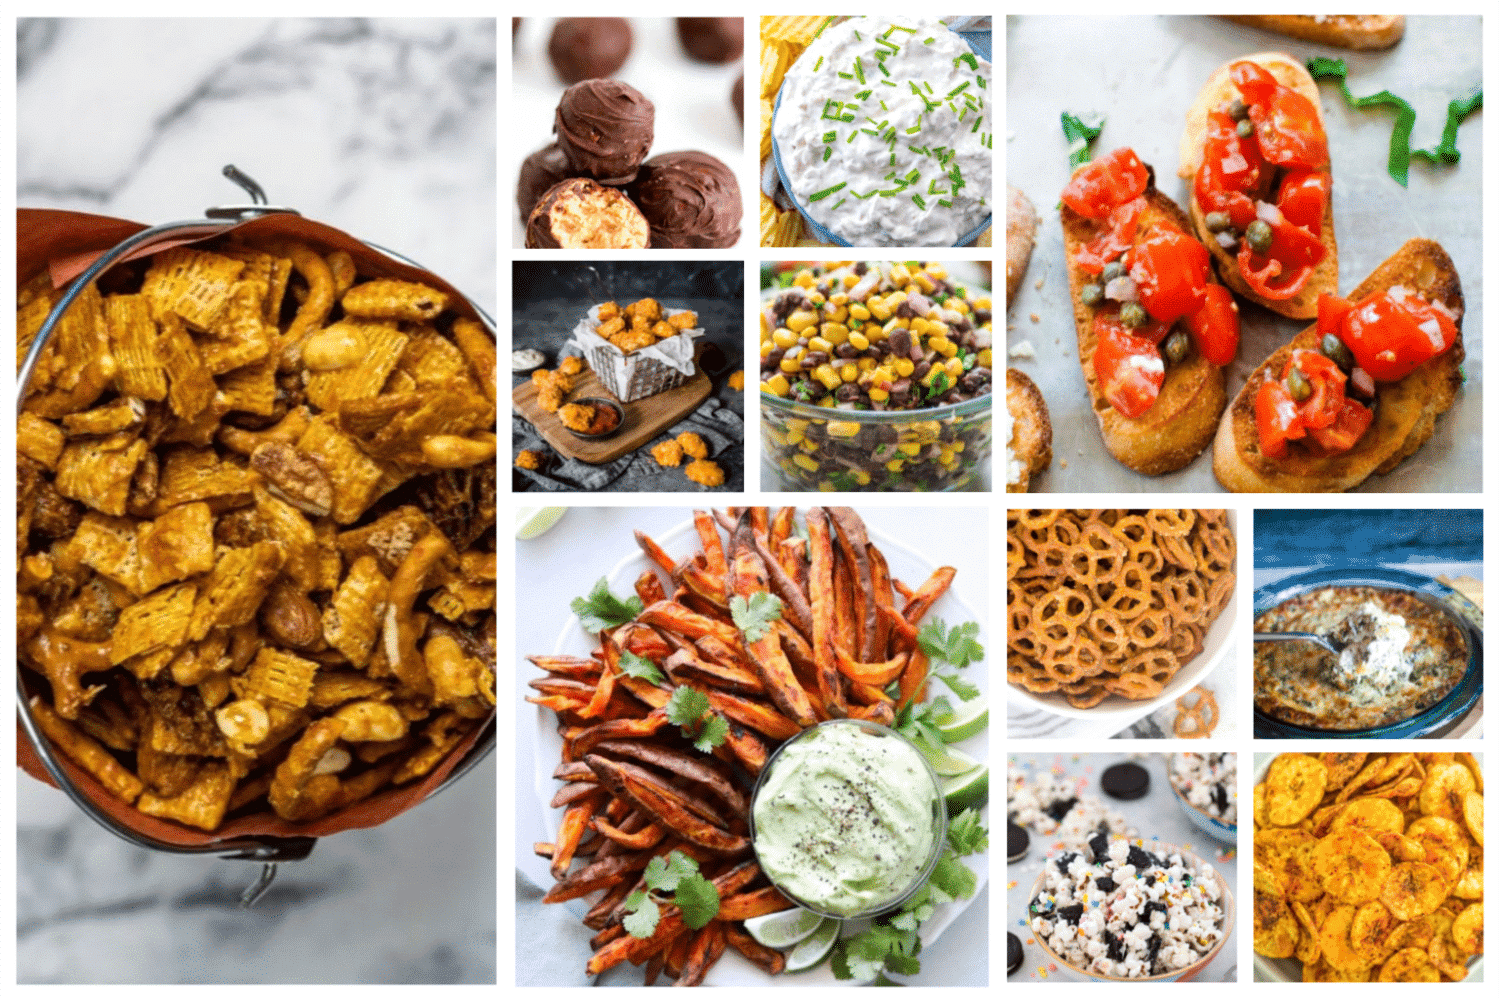 Snackflix & Chill | Best Recipes for Binge-Watching Your Favorite Show